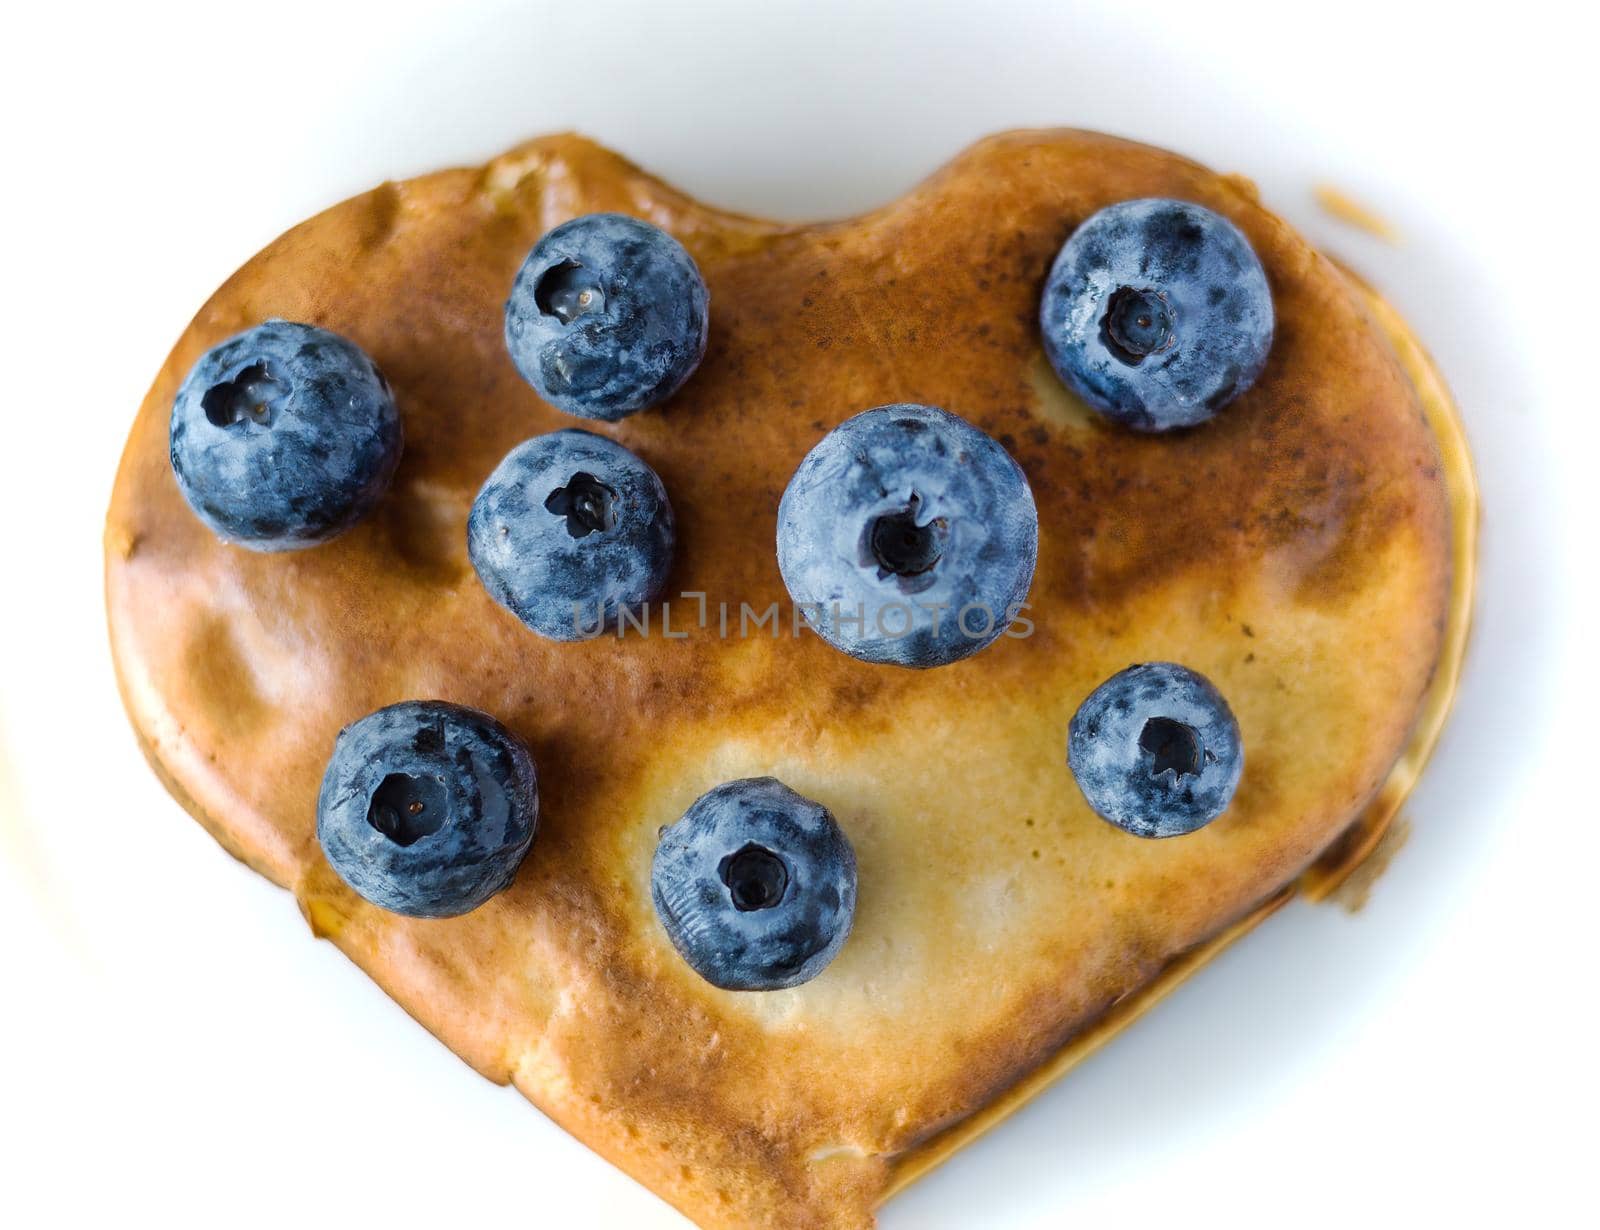 Healthy food concept displaying image of full heart shape pan cake with blueberries fruit on top isolated on white background